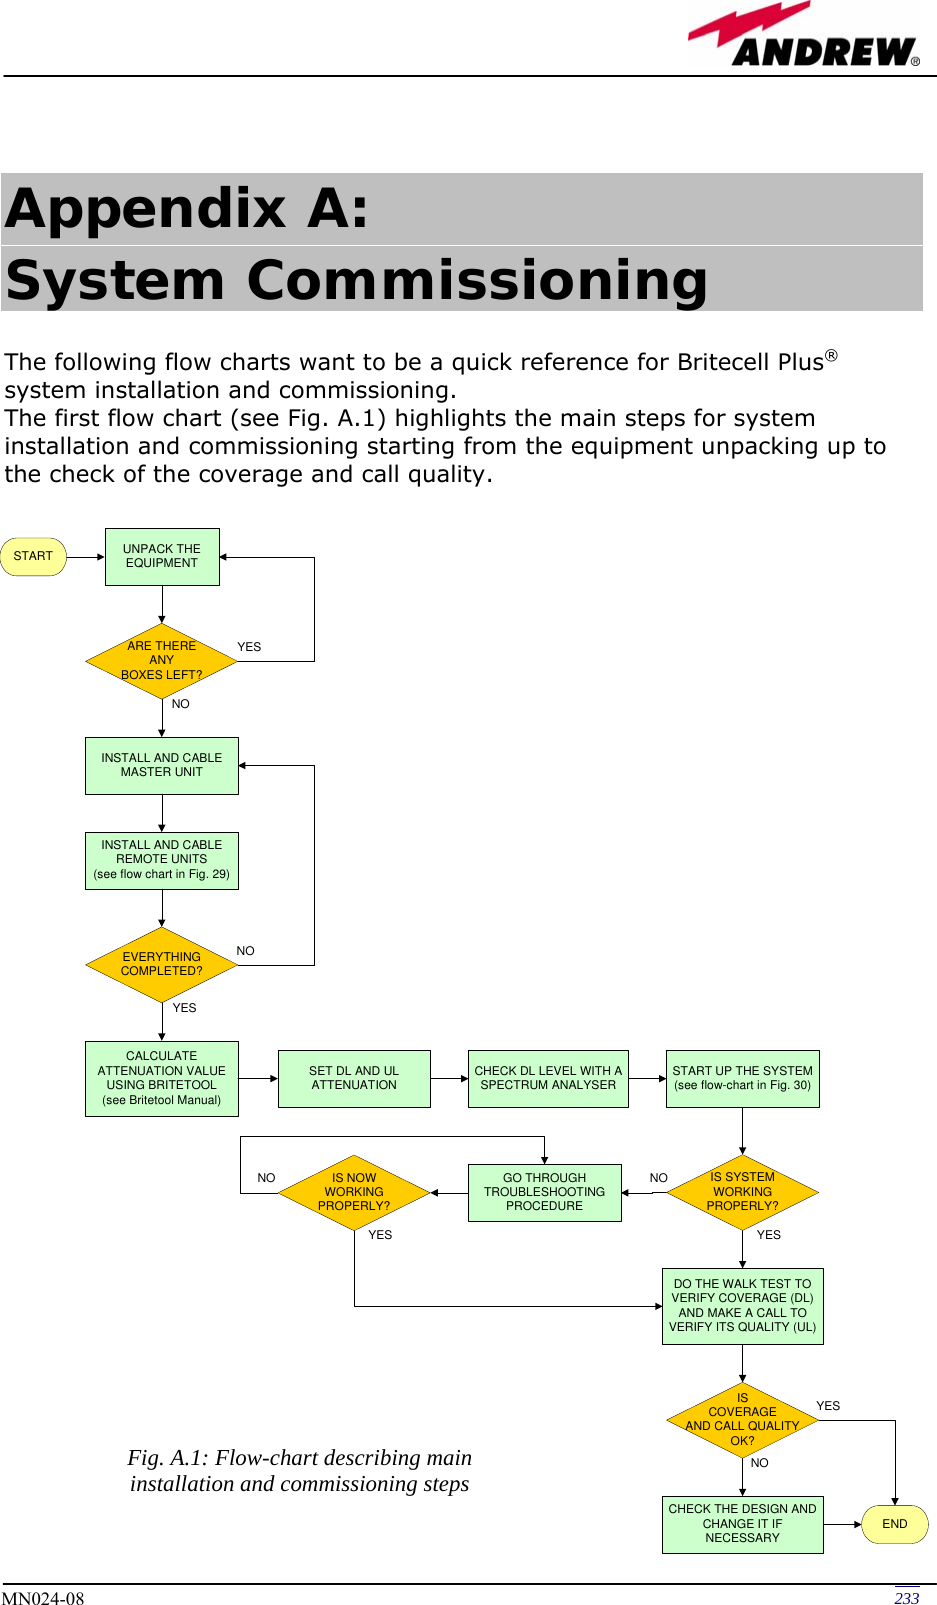   233MN024-08  Appendix A: System Commissioning  The following flow charts want to be a quick reference for Britecell Plus® system installation and commissioning. The first flow chart (see Fig. A.1) highlights the main steps for system installation and commissioning starting from the equipment unpacking up to the check of the coverage and call quality.                                    Fig. A.1: Flow-chart describing main installation and commissioning steps START UNPACK THEEQUIPMENTARE THEREANYBOXES LEFT?YESNOINSTALL AND CABLEMASTER UNITINSTALL AND CABLEREMOTE UNITS(see flow chart in Fig. 29)EVERYTHINGCOMPLETED?YESNOCALCULATEATTENUATION VALUEUSING BRITETOOL(see Britetool Manual)SET DL AND ULATTENUATION START UP THE SYSTEM(see flow-chart in Fig. 30)IS SYSTEMWORKINGPROPERLY?YESNOGO THROUGHTROUBLESHOOTINGPROCEDUREIS NOWWORKINGPROPERLY?DO THE WALK TEST TOVERIFY COVERAGE (DL)AND MAKE A CALL TOVERIFY ITS QUALITY (UL)YESNOISCOVERAGEAND CALL QUALITYOK?YESNOCHECK DL LEVEL WITH ASPECTRUM ANALYSERCHECK THE DESIGN ANDCHANGE IT IFNECESSARY END